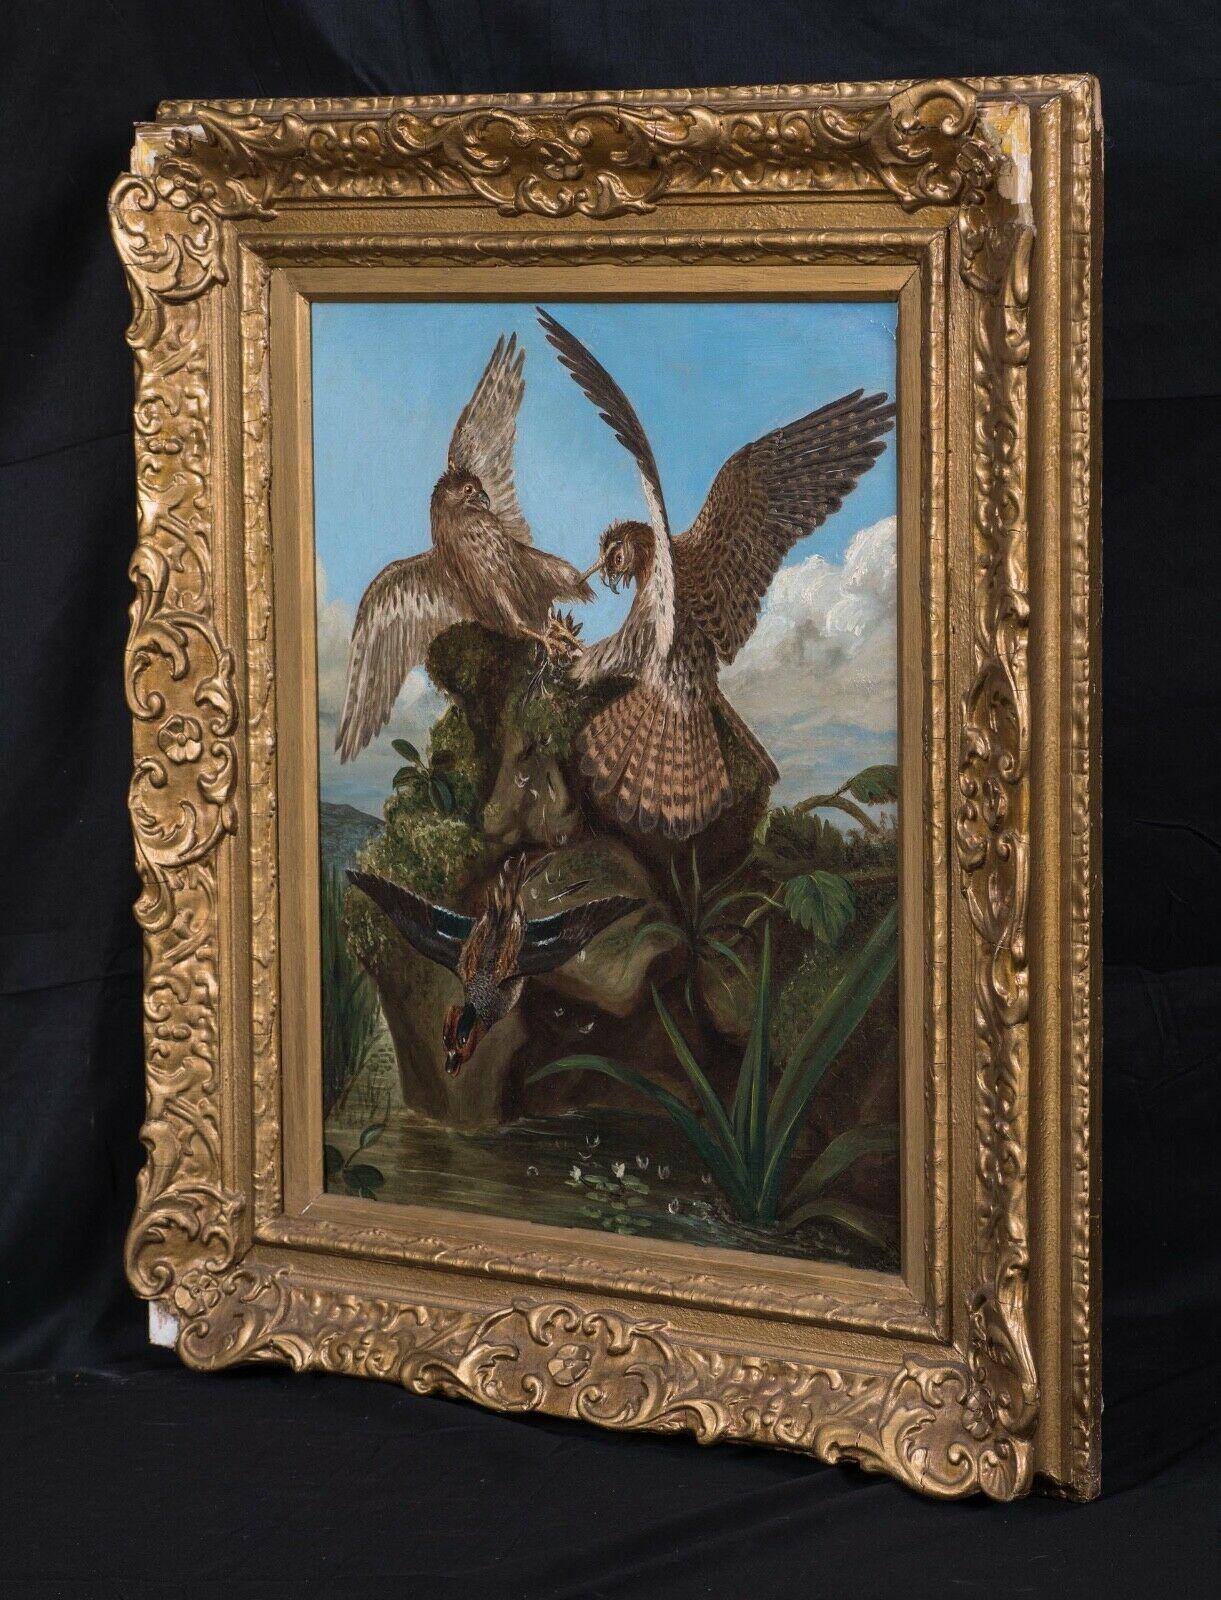 Hawks Fighting, 19th Century

attributed to Henry Leonidas Rolfe (1824-1881) 

Fine large 19th century study of a pair of hawks fighting as other bird escape, oil on panel. Superb quality and condition early ornithological study. Clean surface